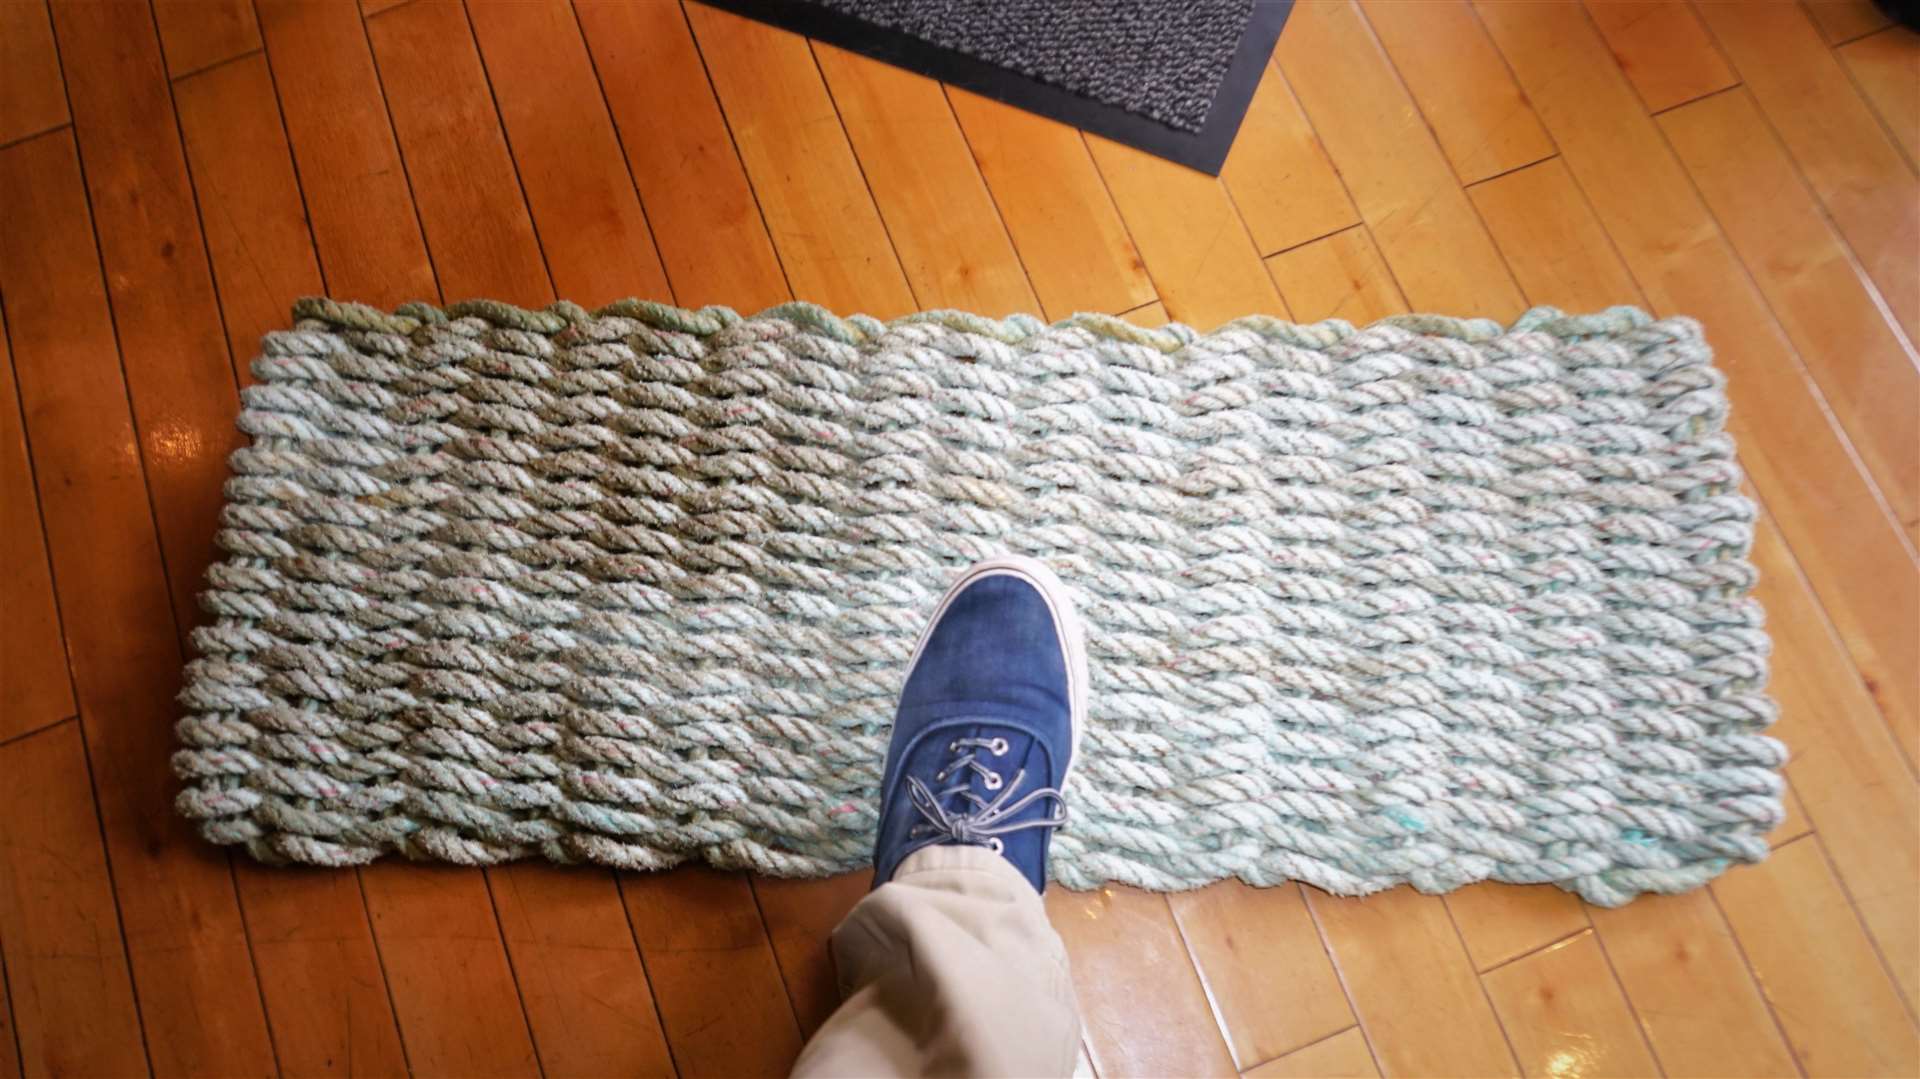 A mat made by the group from discarded fishing rope recovered from Caithness beaches. Similar items were sold at a pop-up shop run by the group.